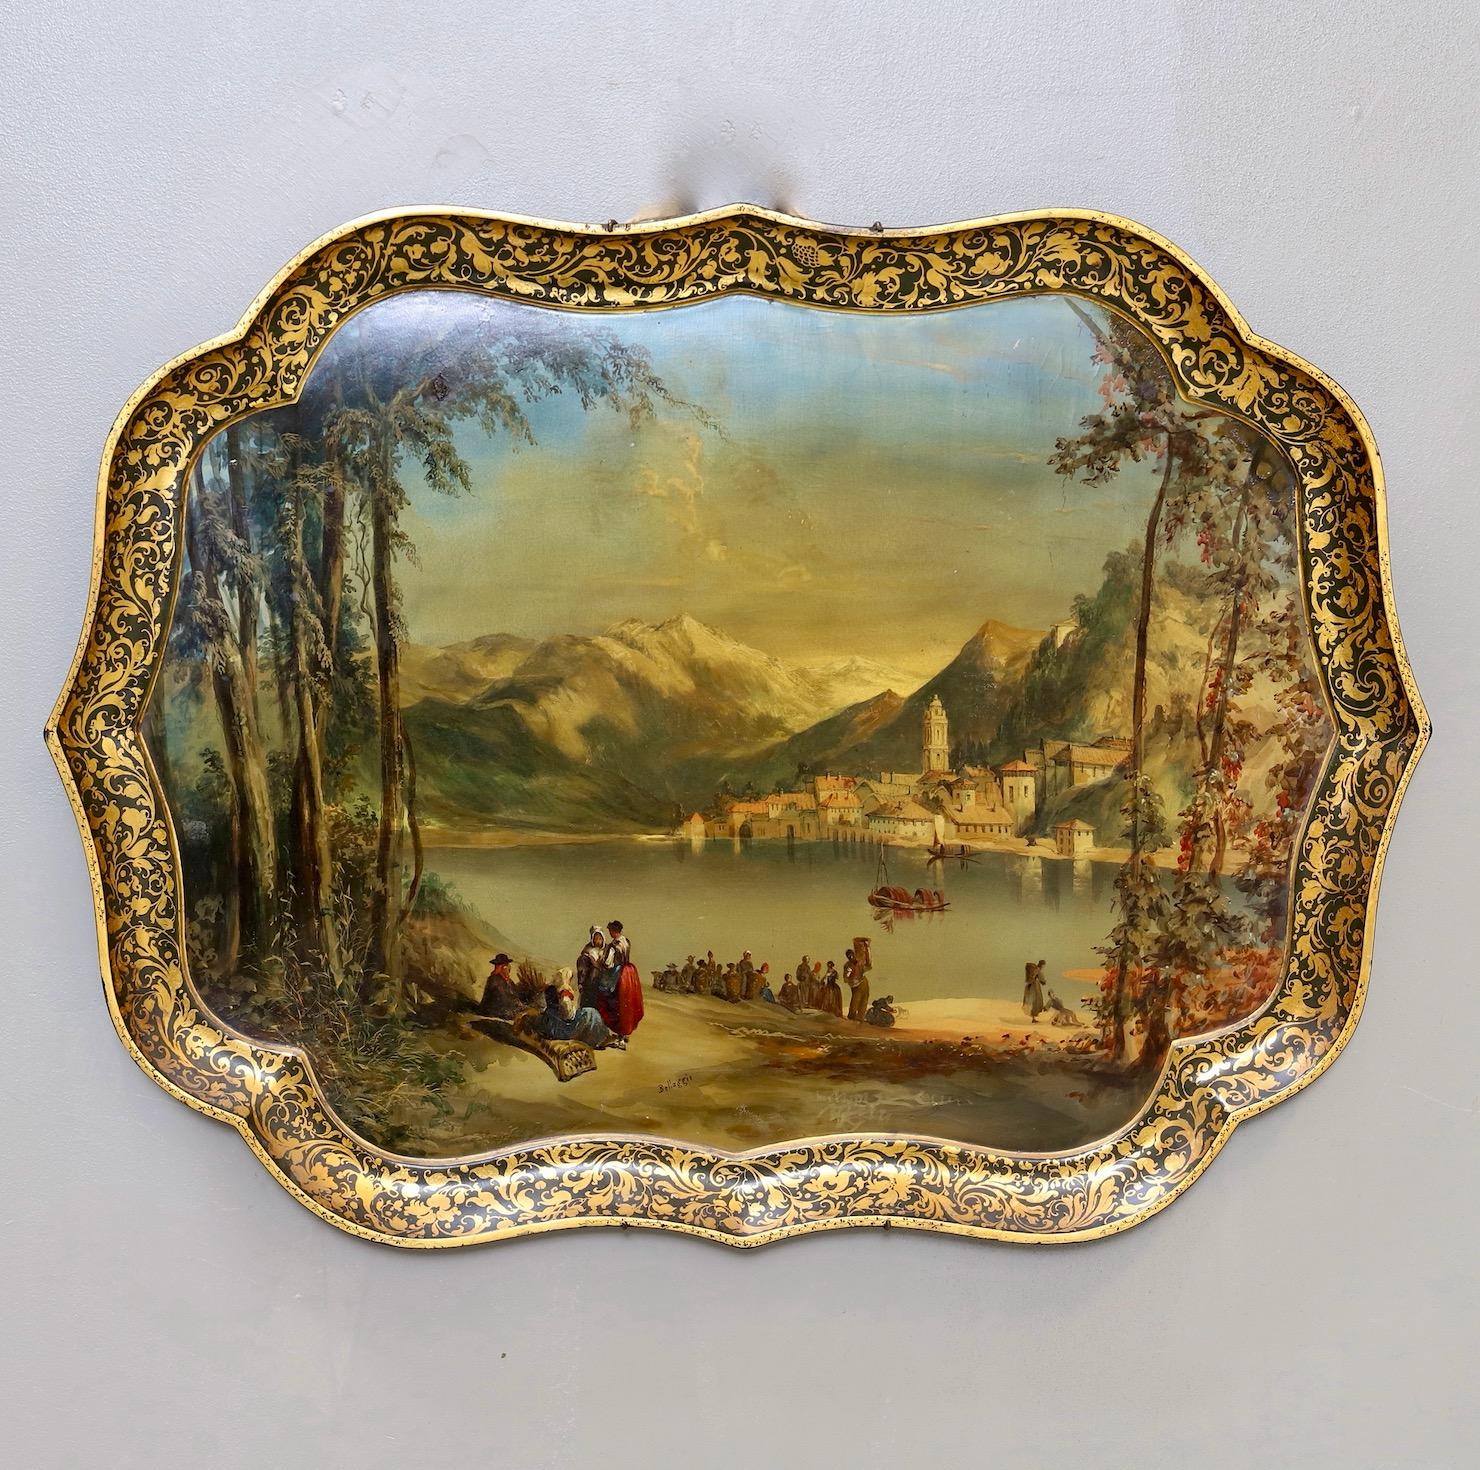 Oiled 19th Century Jennens & Bettridge Tray With a View of Bellagio, Lake Como